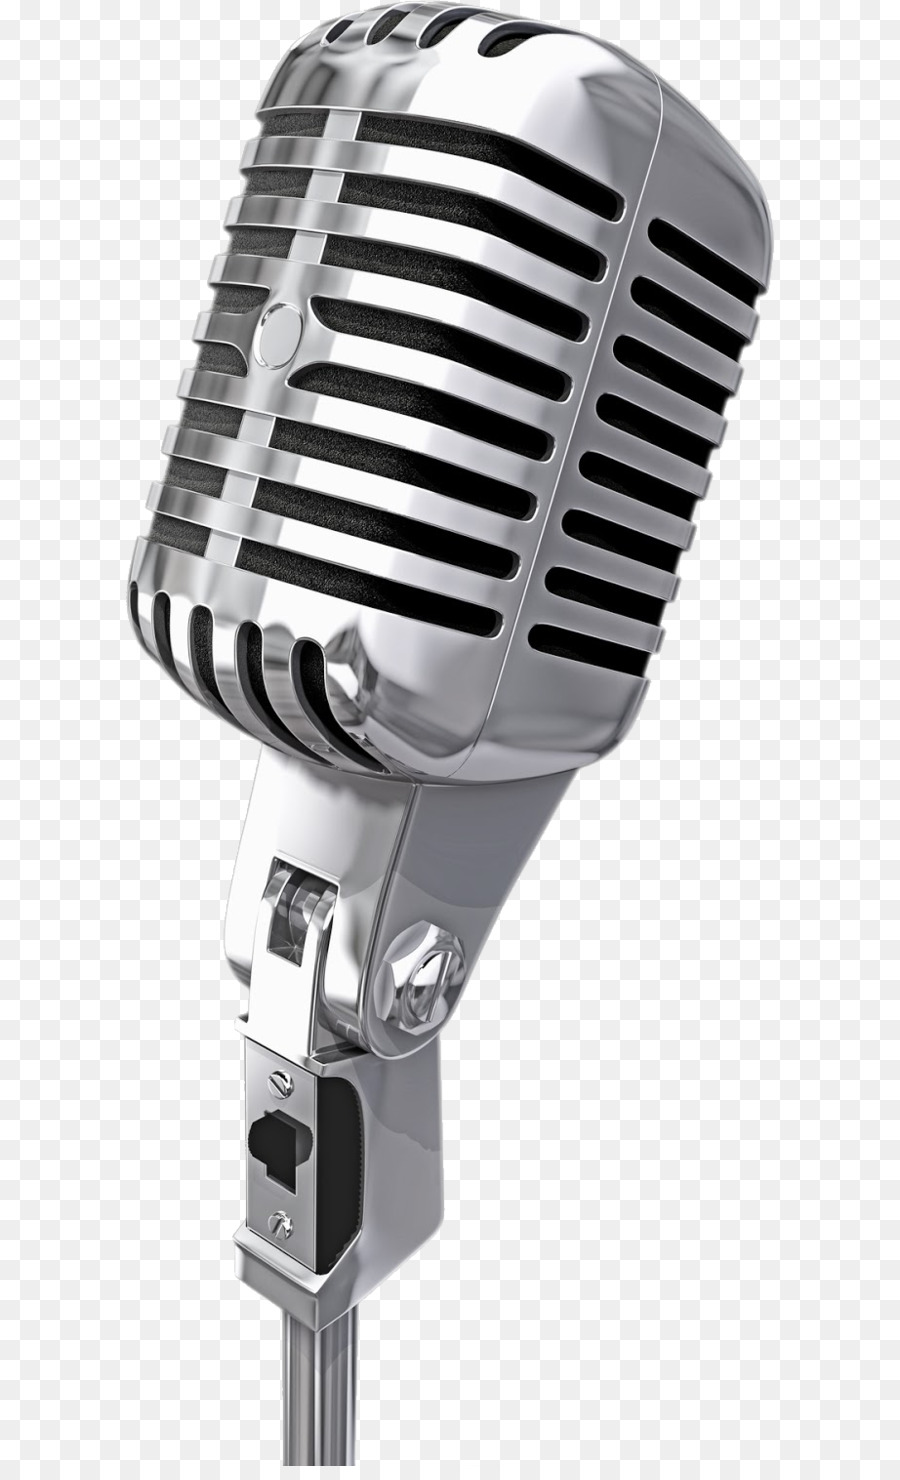 Free Microphone PNG - 165223